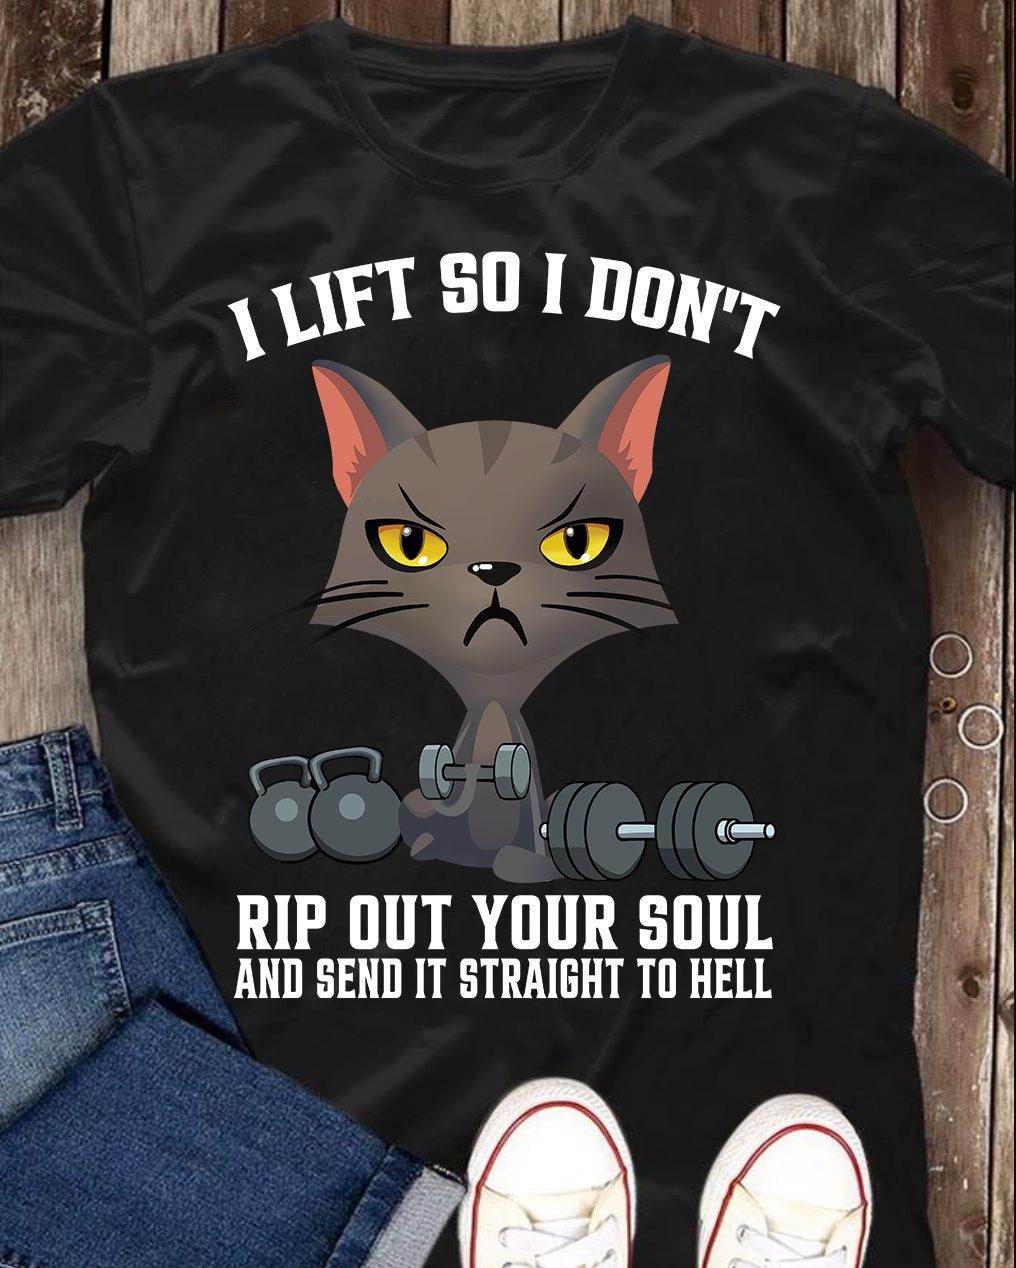 I life so I don't rip out your soul and send it straight to hell - Black cat lifting, lifting weights